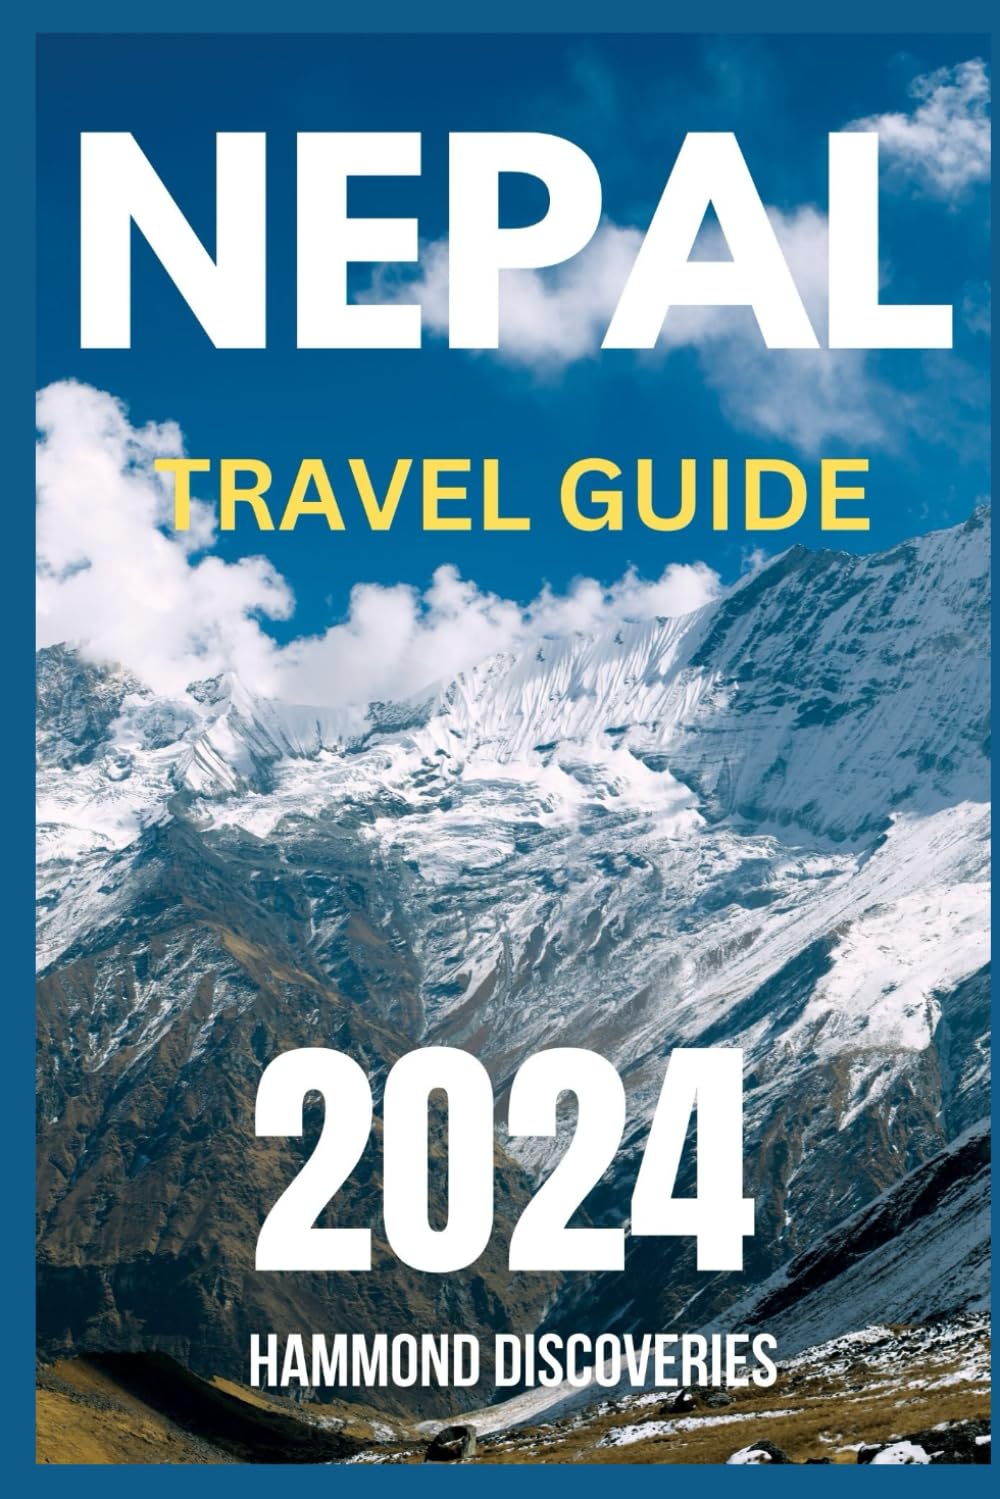 NEPAL TRAVEL GUIDE 2024: Explore the Country's Rich History, Must-Visit attractions, Essential First-Time Visitor Tips, and Thrilling Vacation Adventures! (Passport to Discovery)